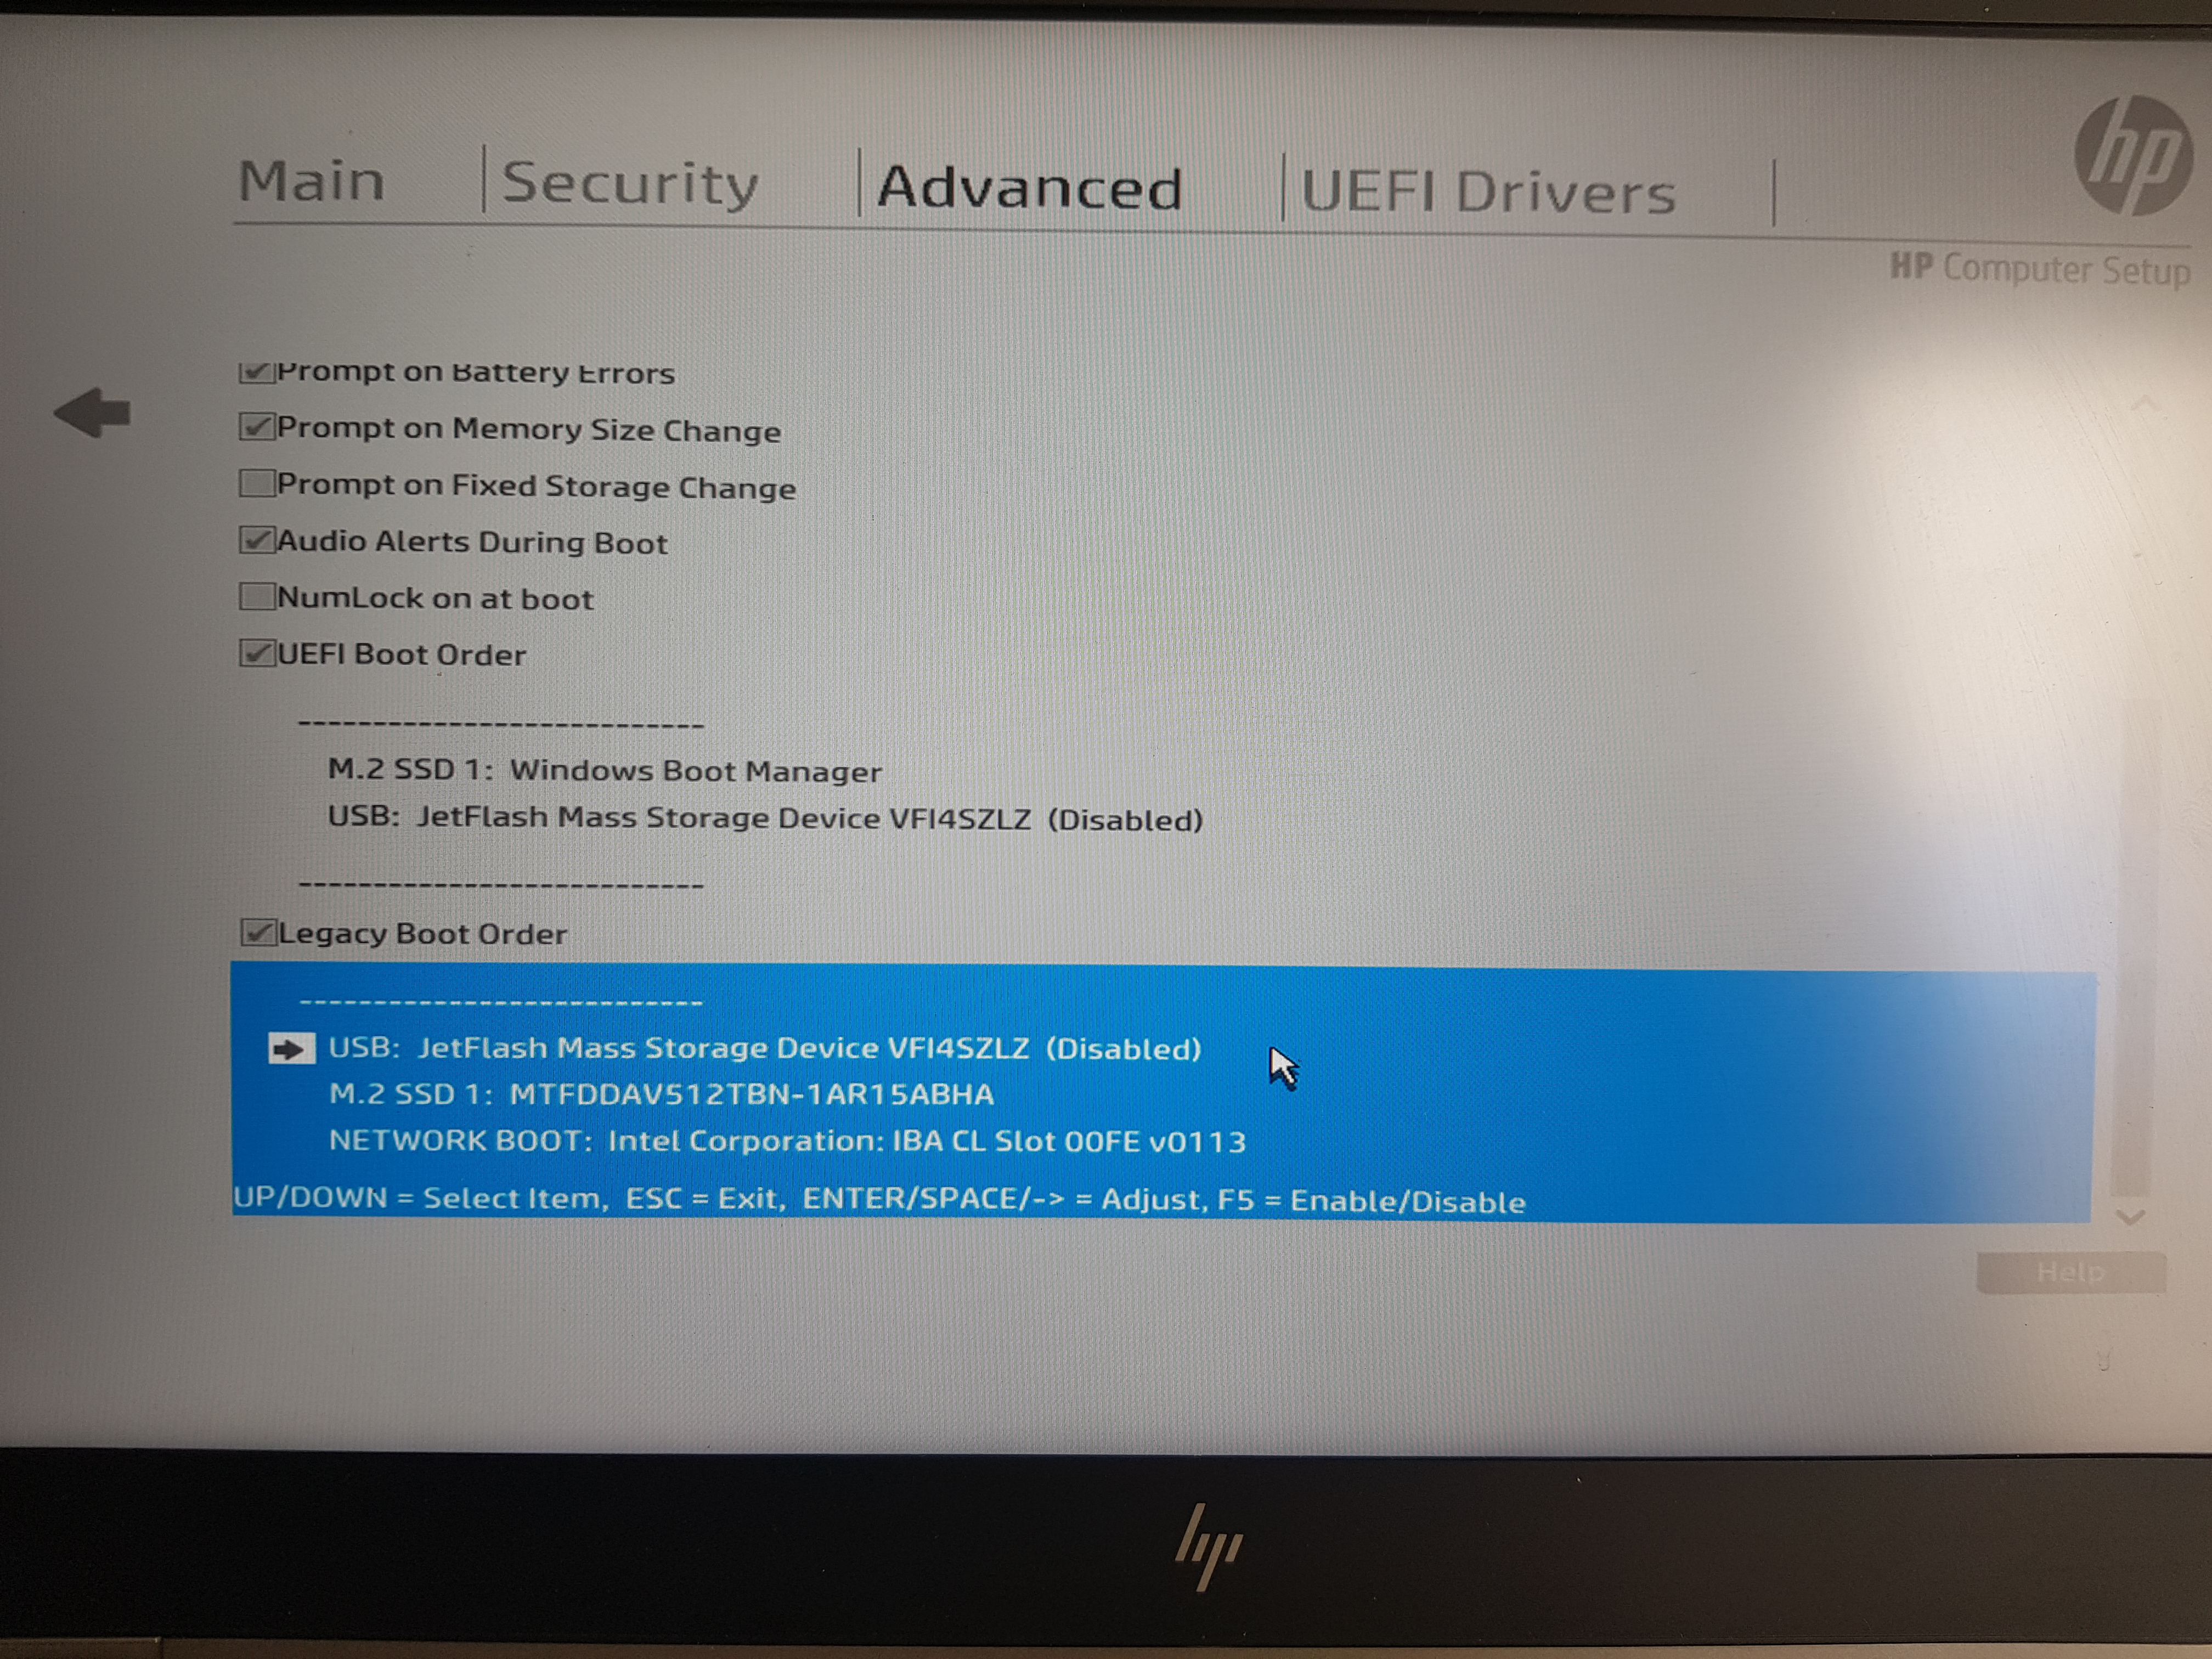 Unable to boot from USB "disabled" - HP Support Community - 8099408